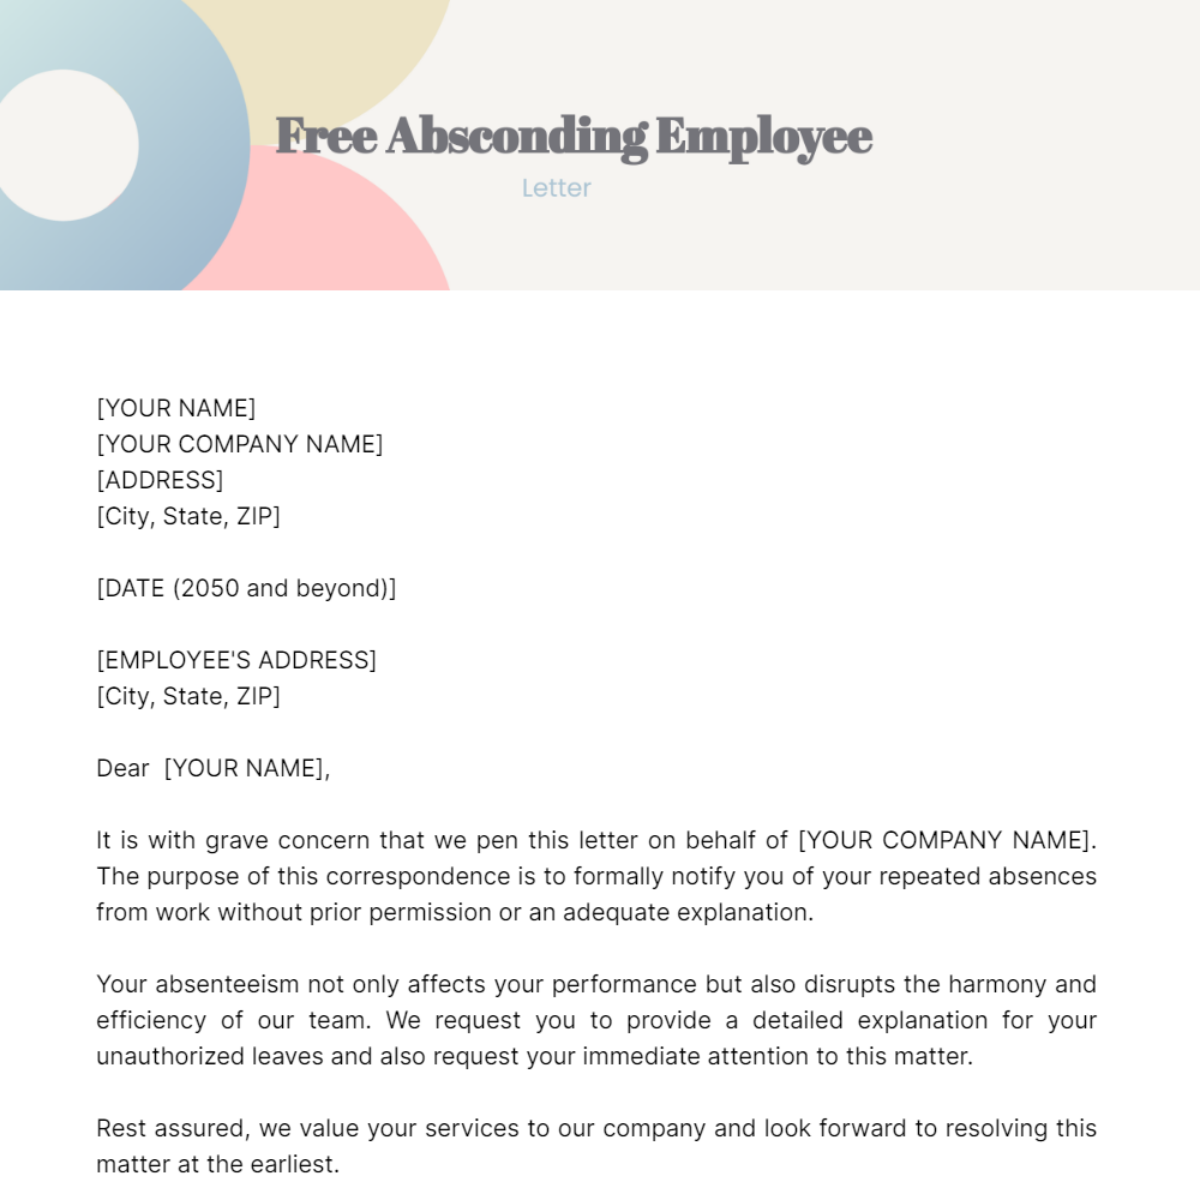 Absconding Employee Letter Template